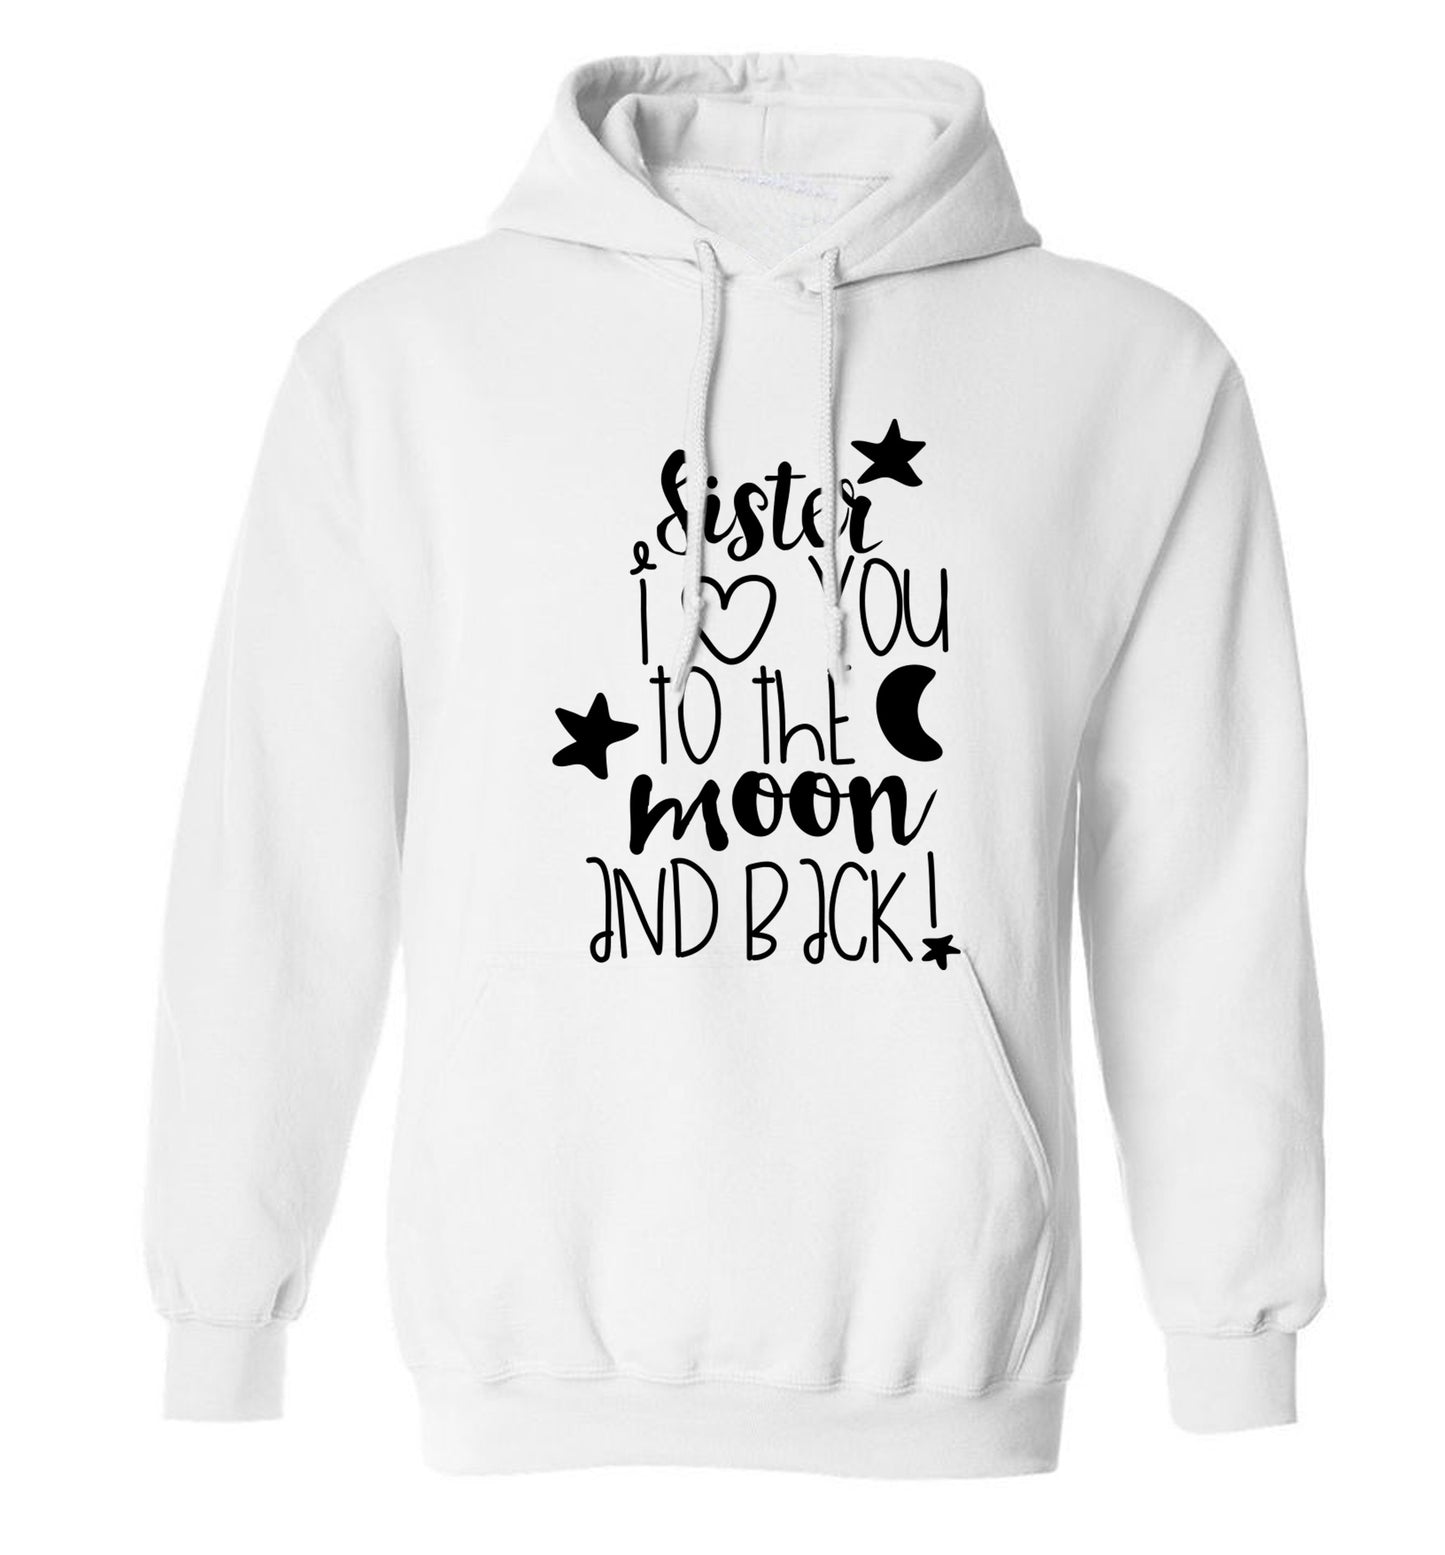 Sister I love you to the moon and back adults unisex white hoodie 2XL